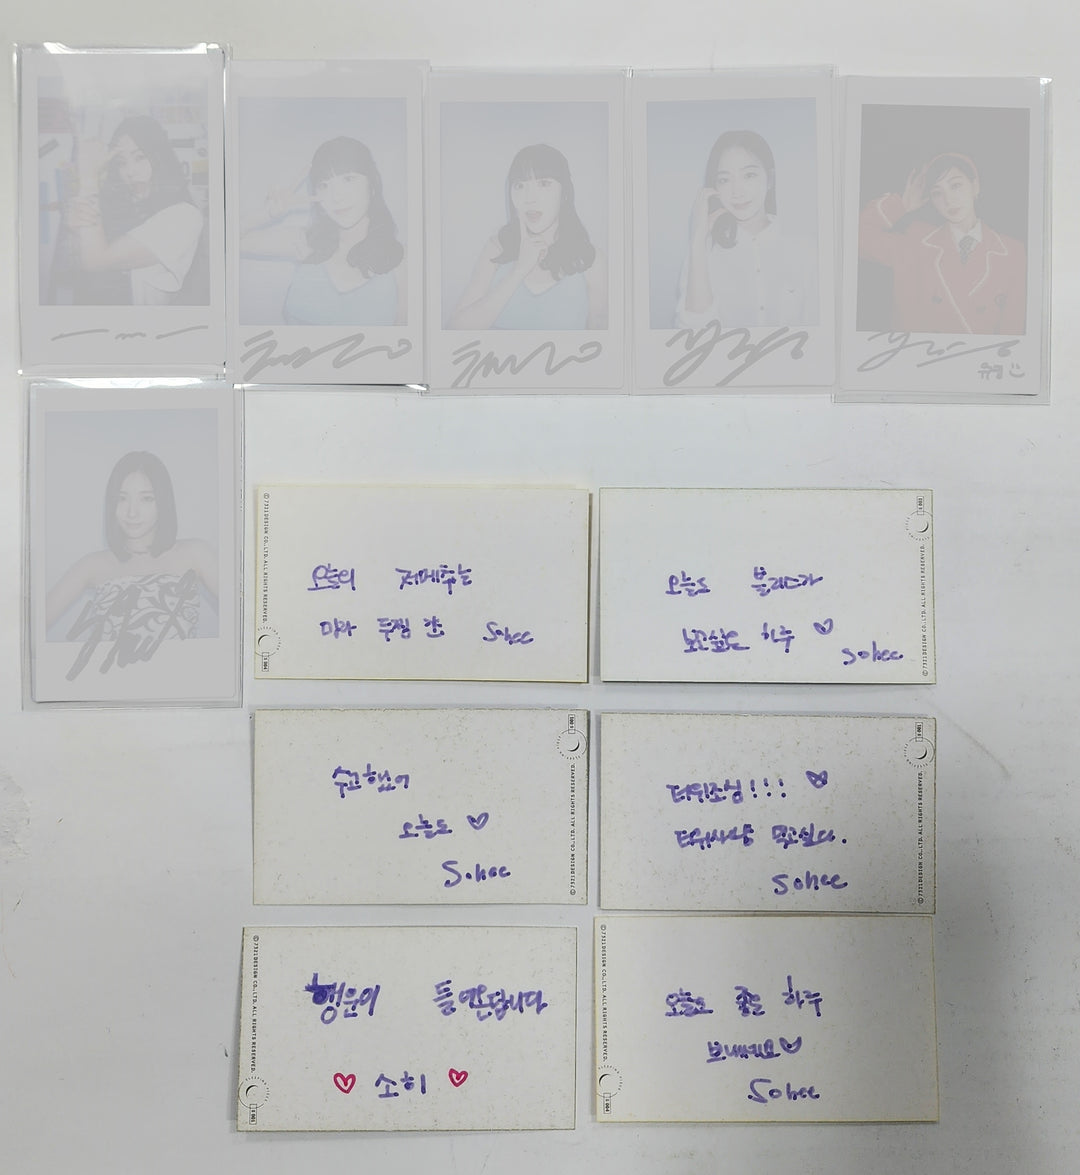 Alice "Show_Down" - Inside Record Hand Autographed(Signed) Polaroid & Message Card